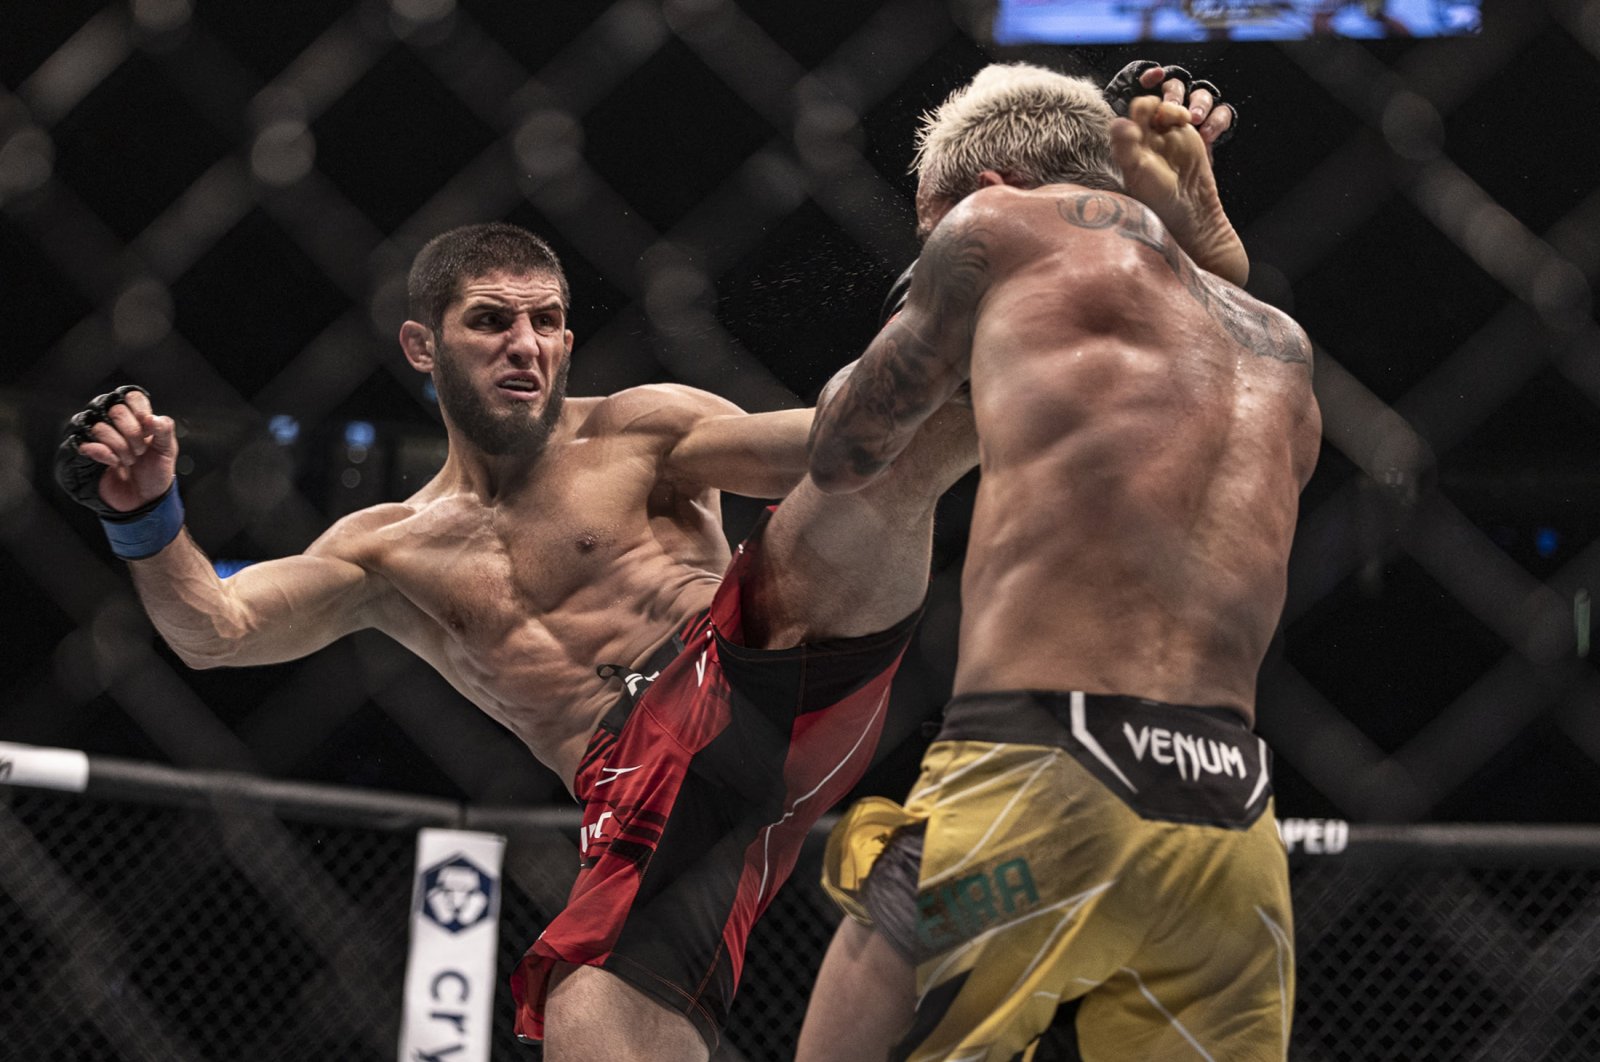 Charles Oliveira (red gloves) and Islam Makhachev (blue gloves) during UFC 280 at Etihad Arena, Abu Dhabi, UAE, Oct. 22, 2022. (USA TODAY Sports via Reuters)